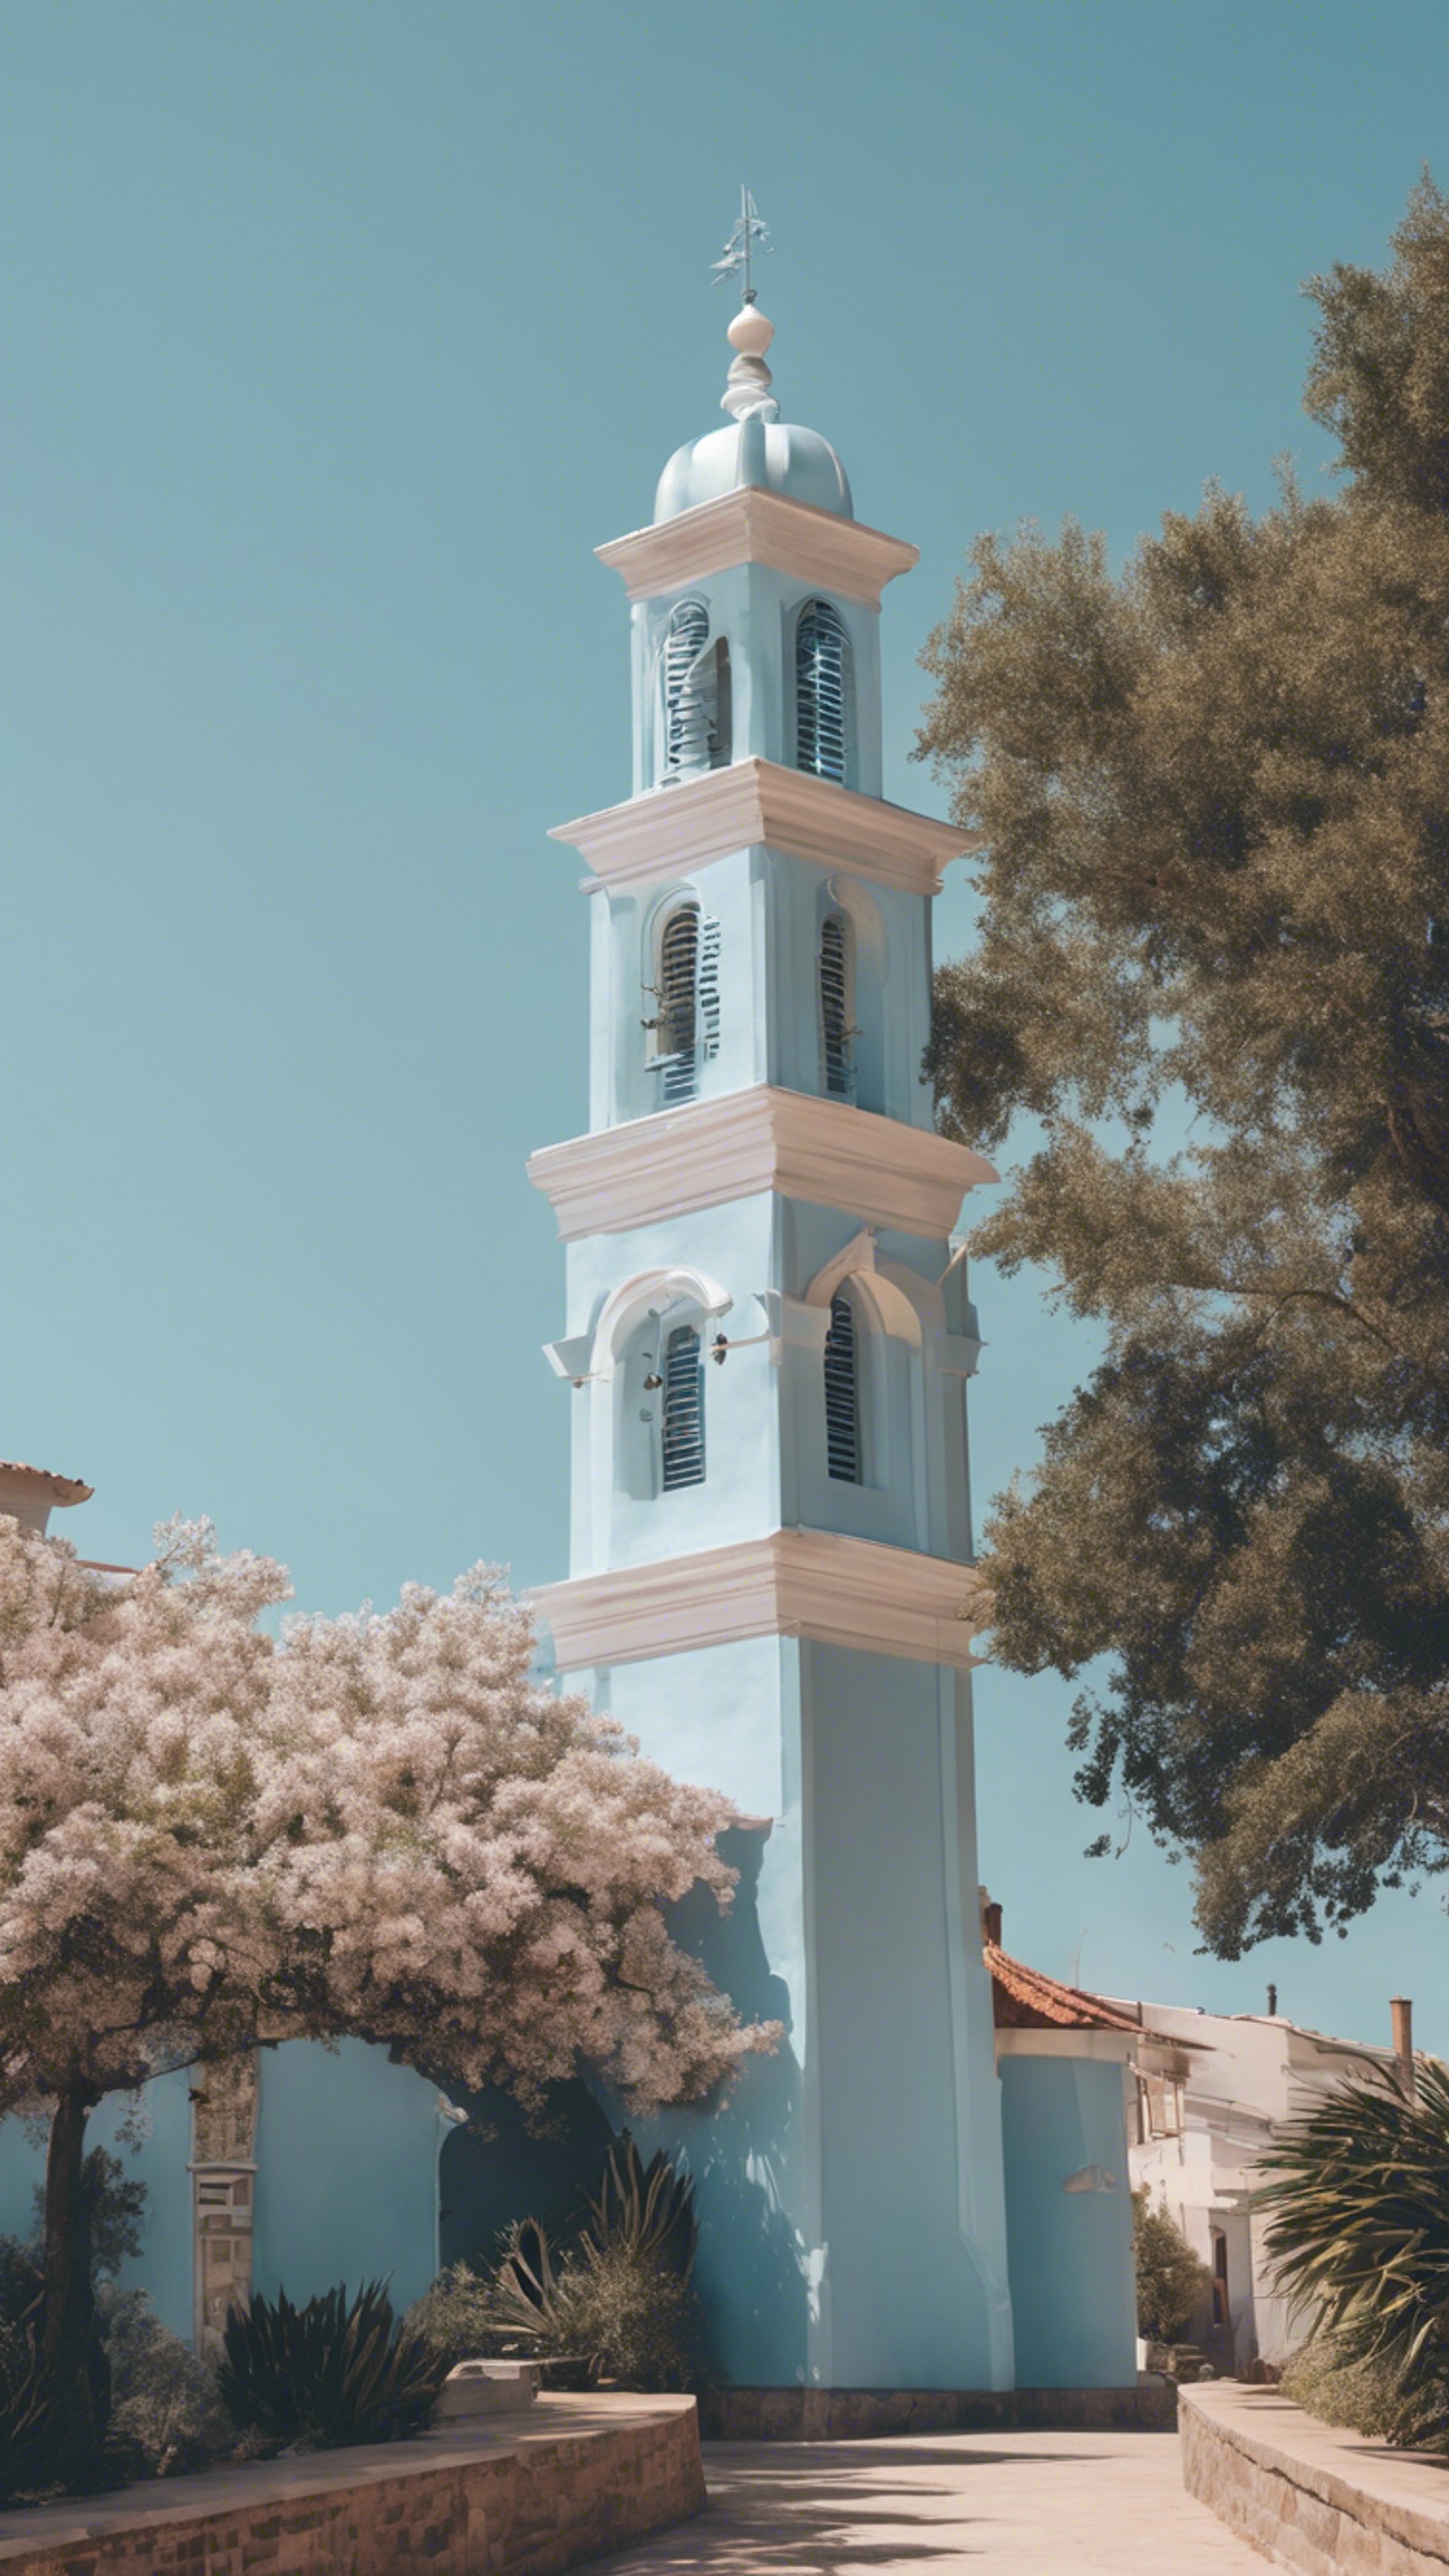 A stately pastel blue bell tower against a clear, sunny sky in a coastal town. Papel de parede[a05c52dcc3054b35b6be]